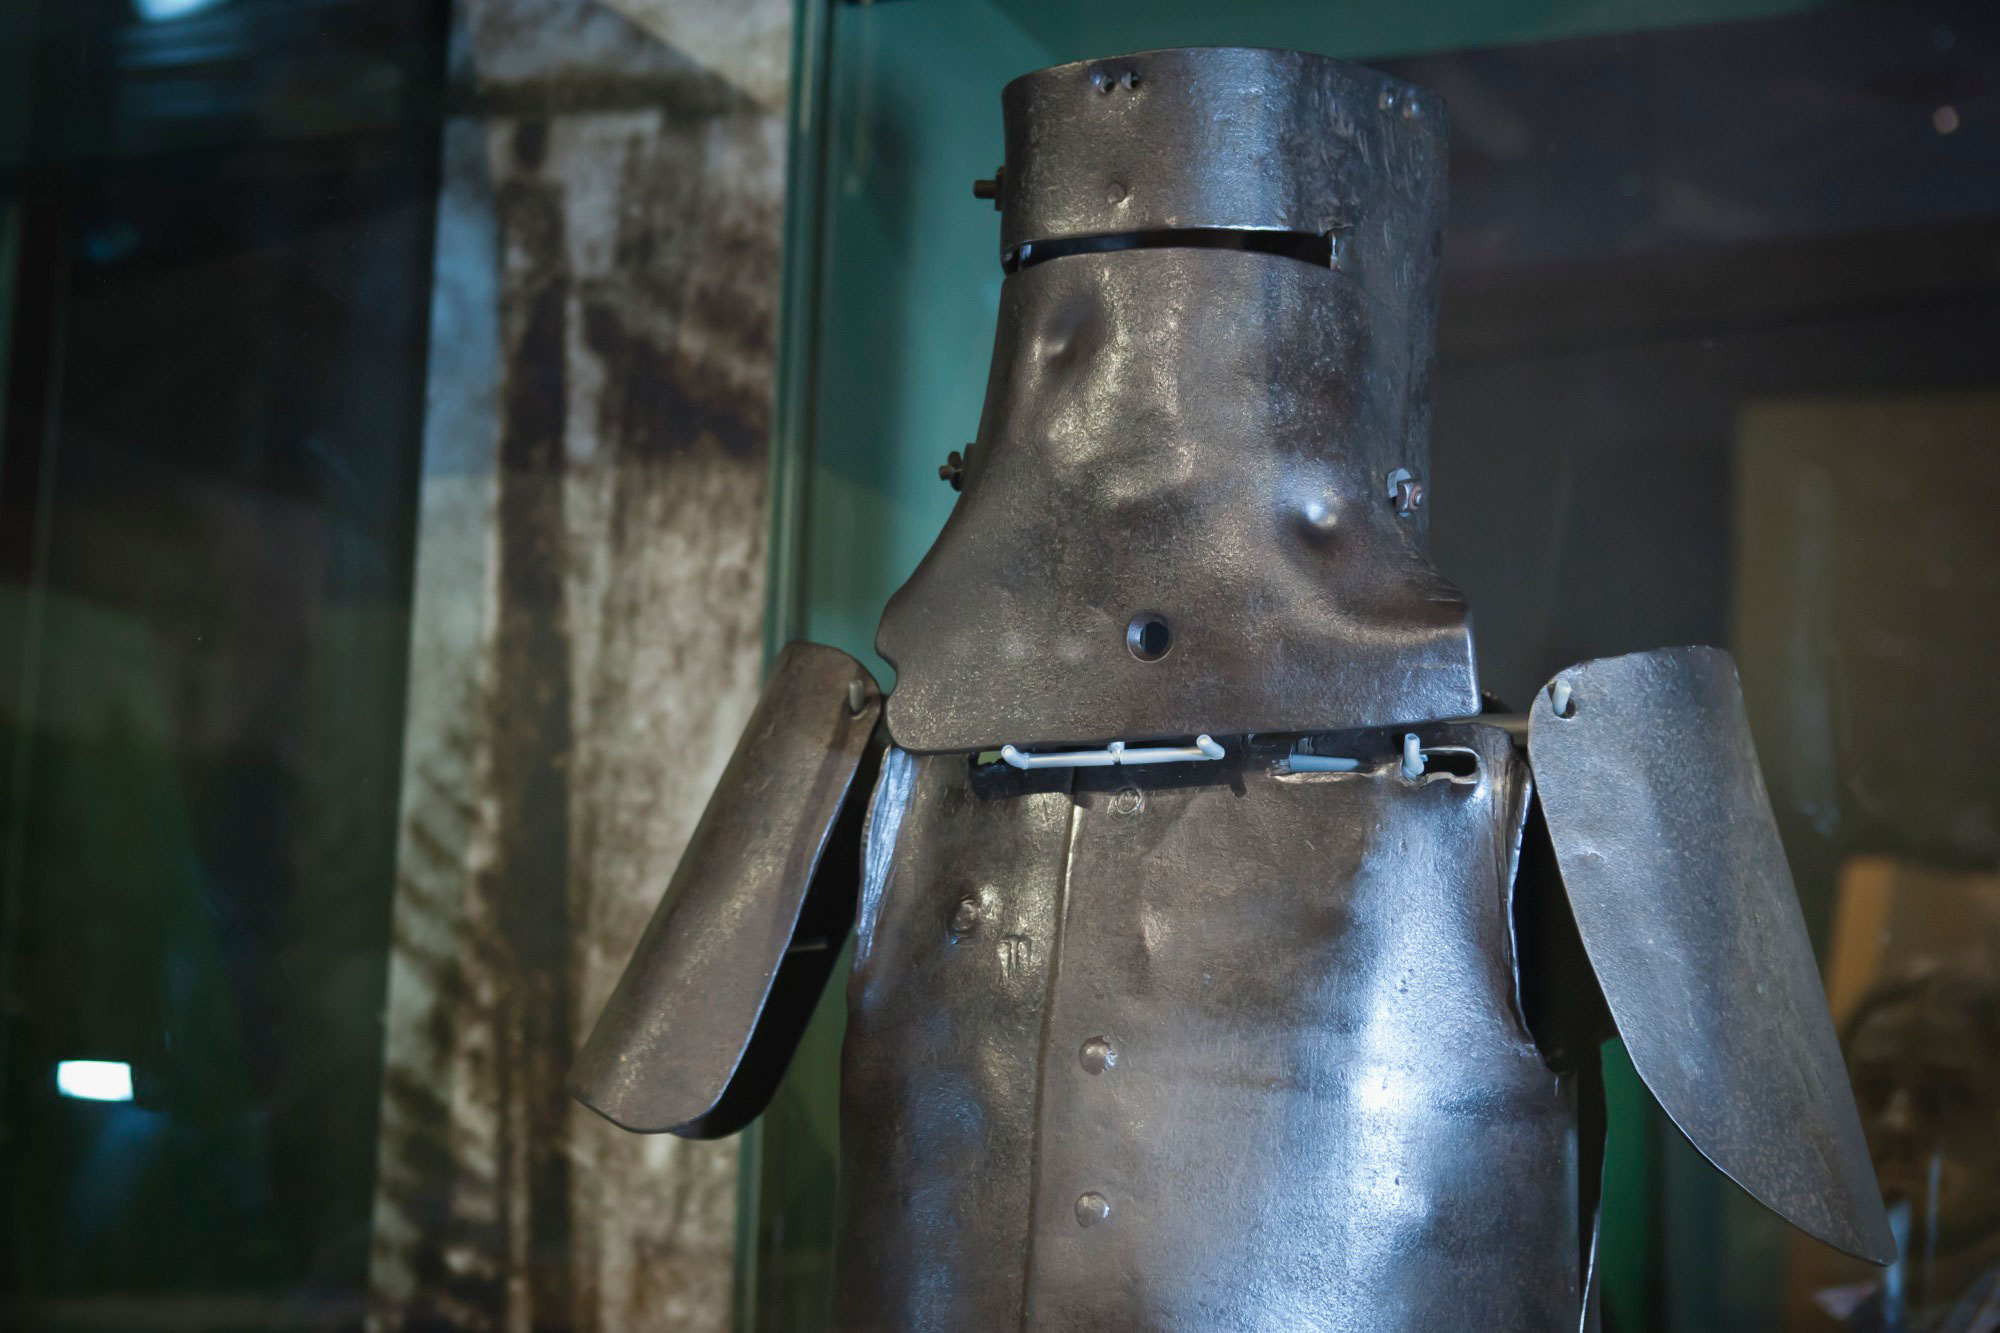 Suit of armour worn by Ned Kelly.